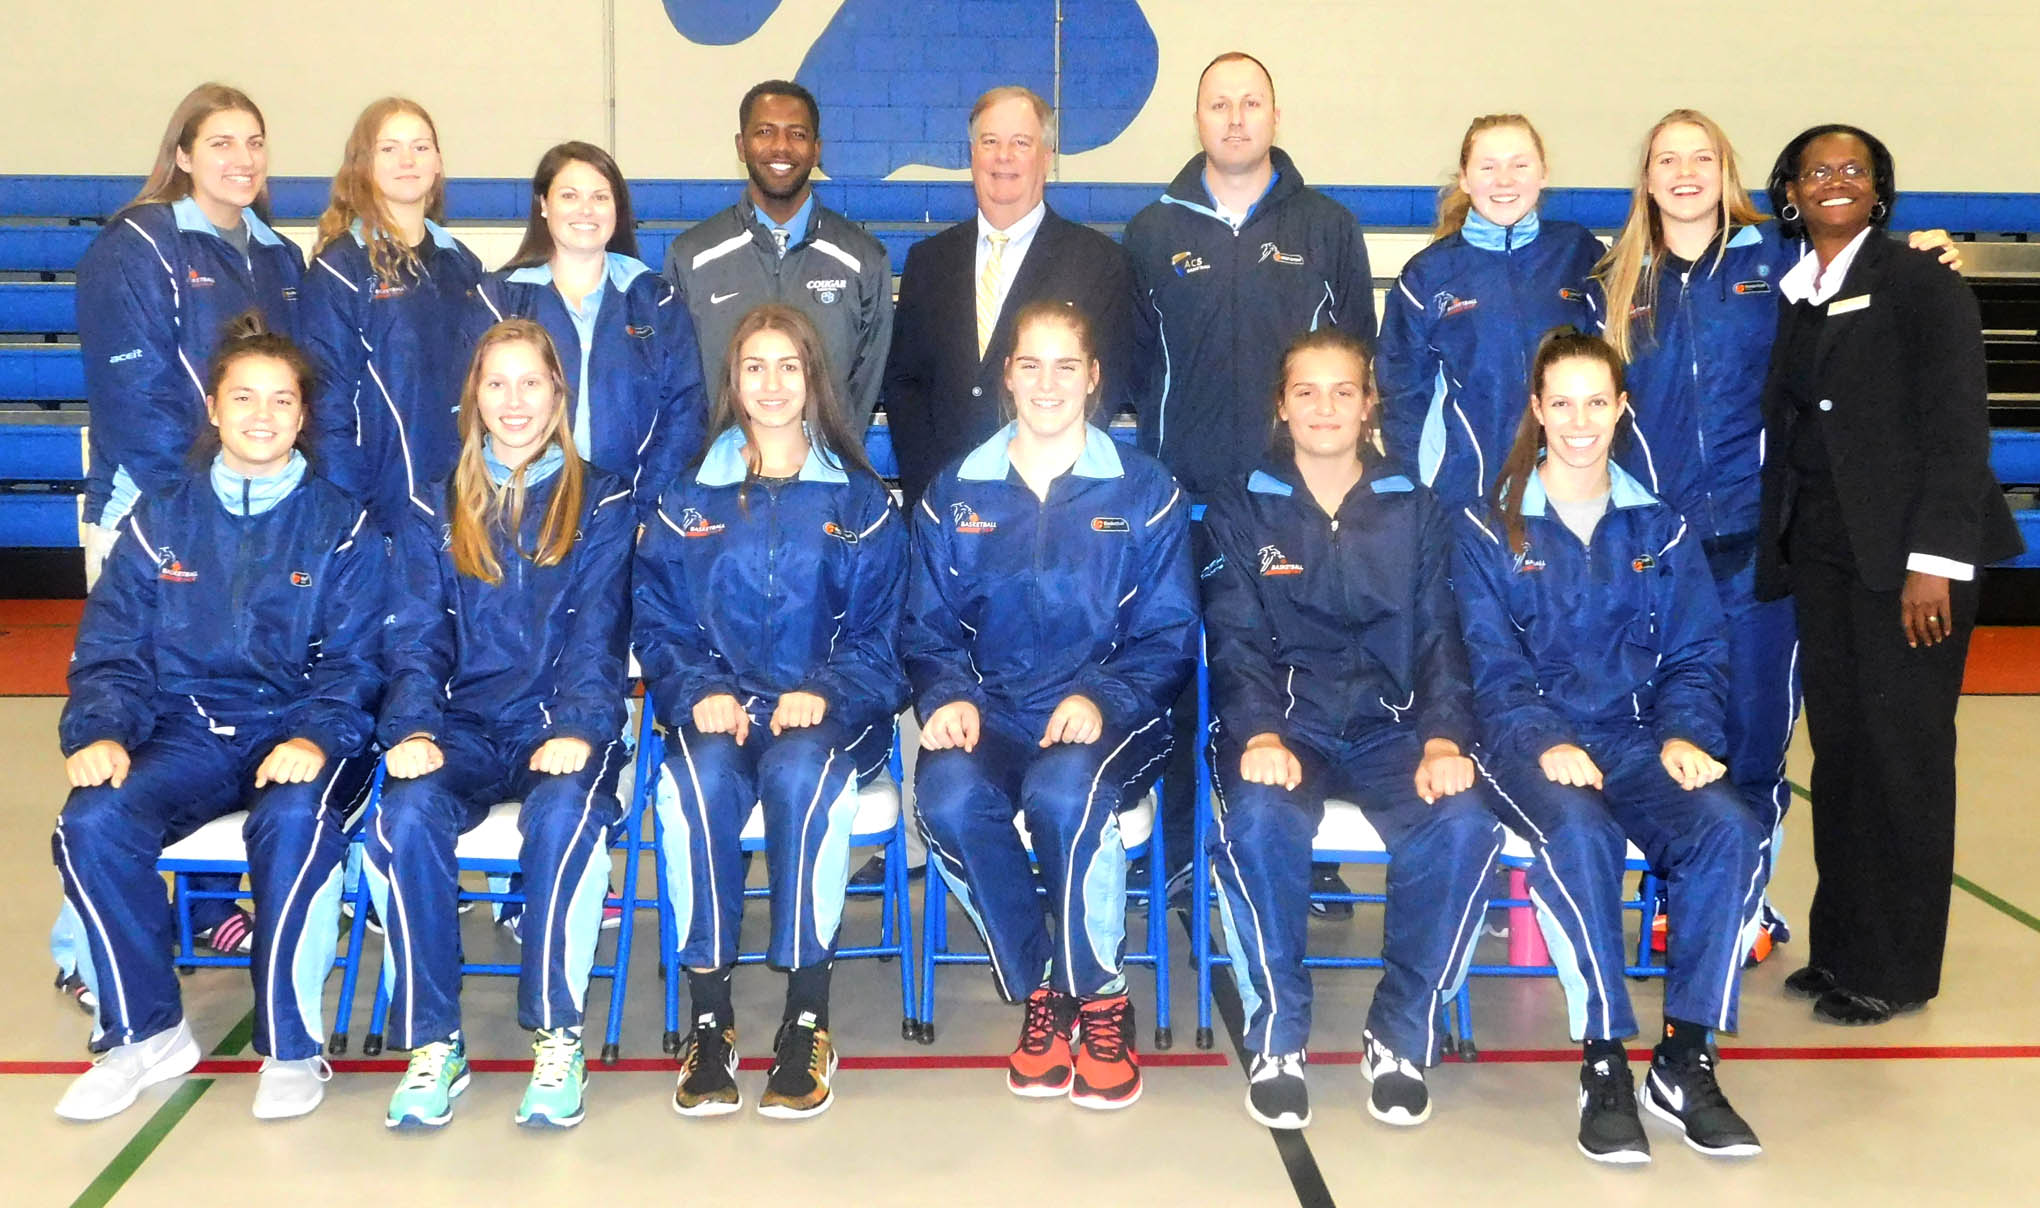 Click to enlarge,  Central Carolina Community College President Dr. T.E. Marchant (standing, fifth from left), CCCC Women's Basketball Coach Tierre Ramsey (standing, fourth from left), and CCCC Student Outreach &amp; Recruitment Specialist Wrenn Crowe (standing, far right) are pictured with the visiting basketball team from New South Wales, Australia. 